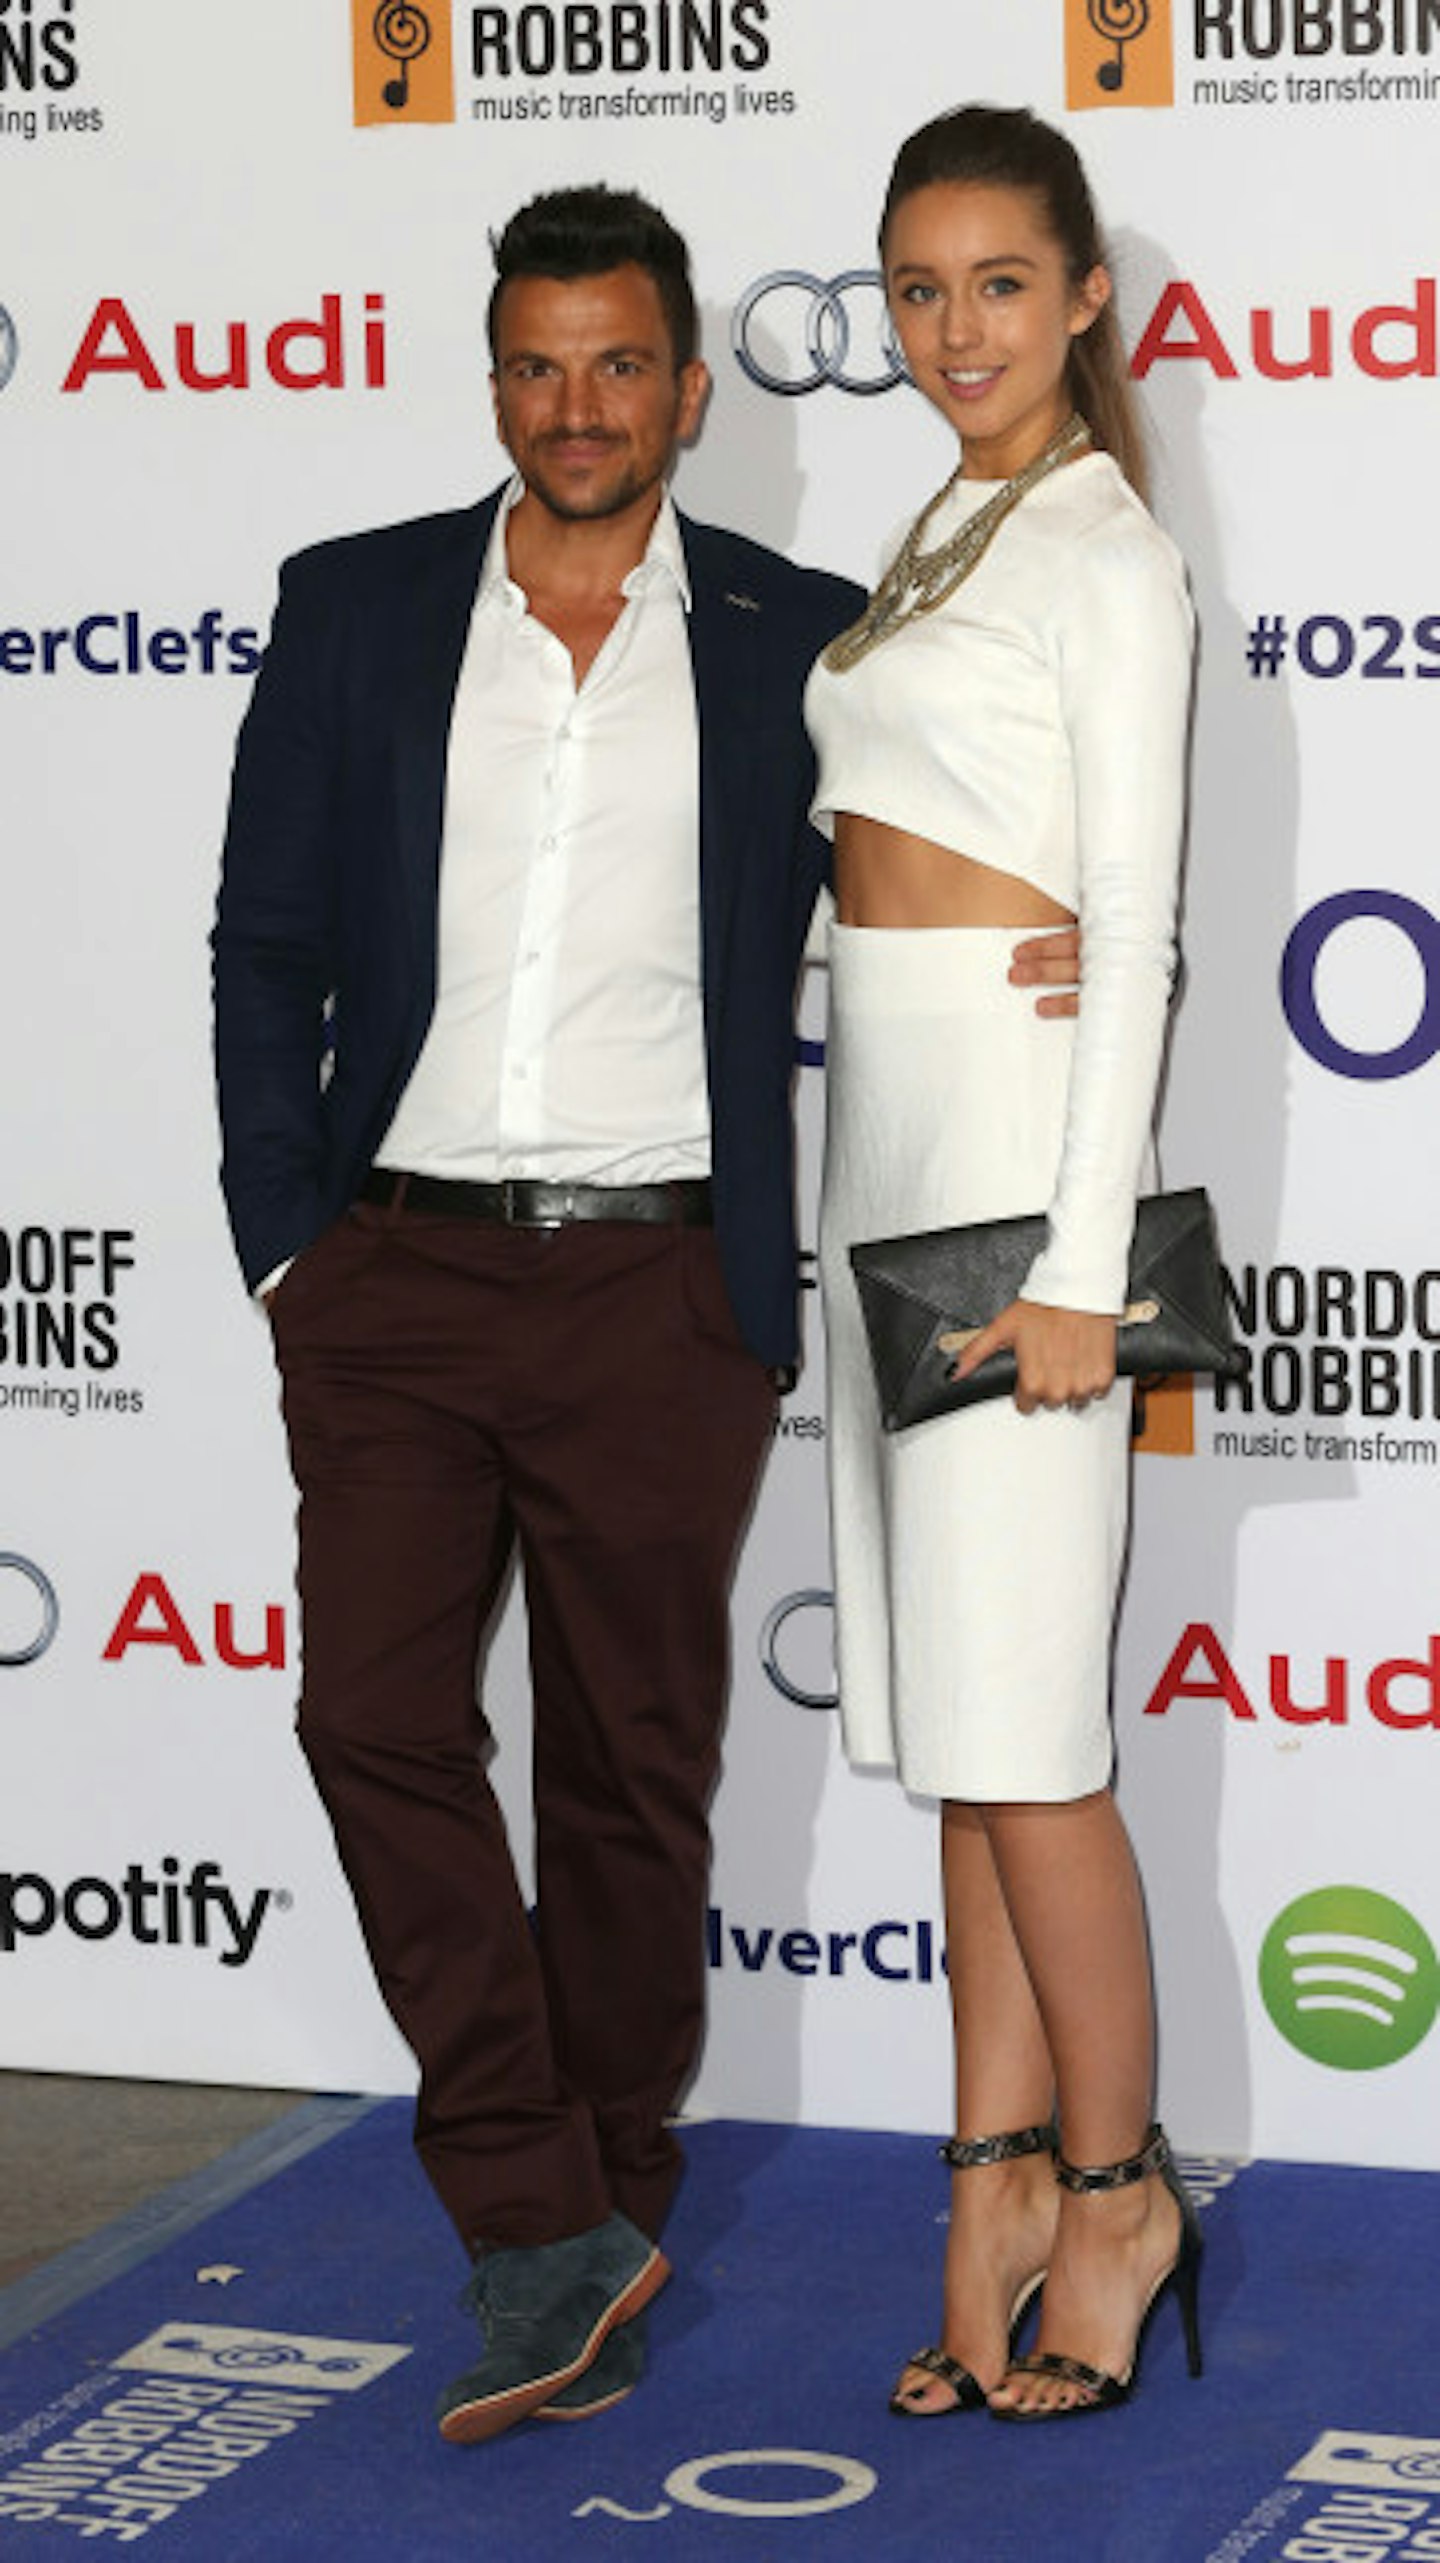 Peter Andre with fiancee Emily MacDonagh